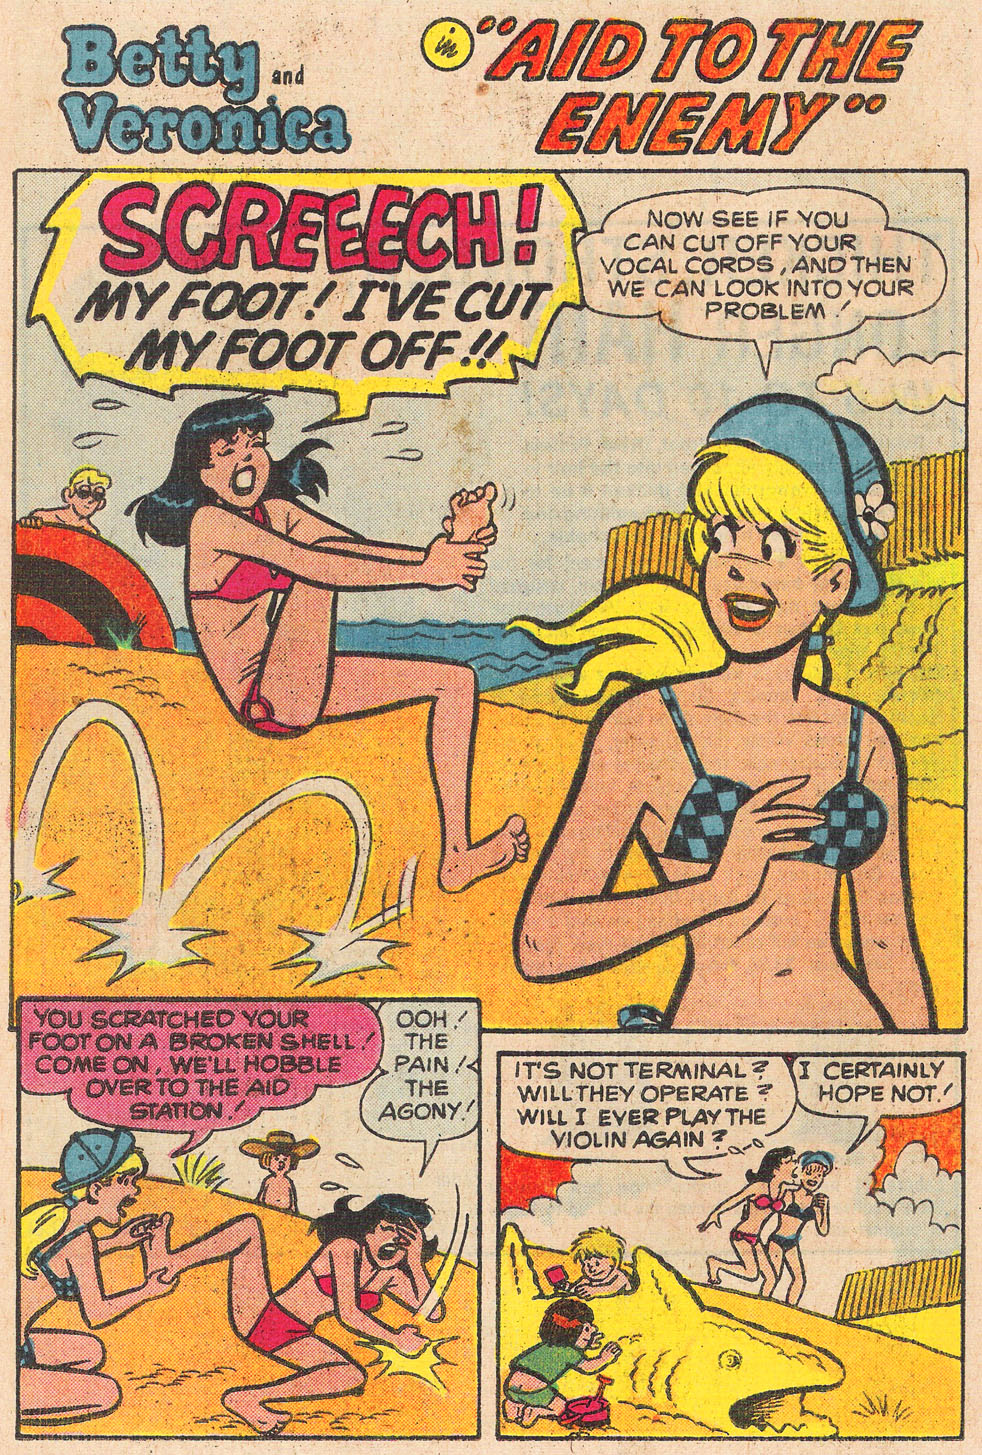 Read online Archie's Girls Betty and Veronica comic -  Issue #251 - 20